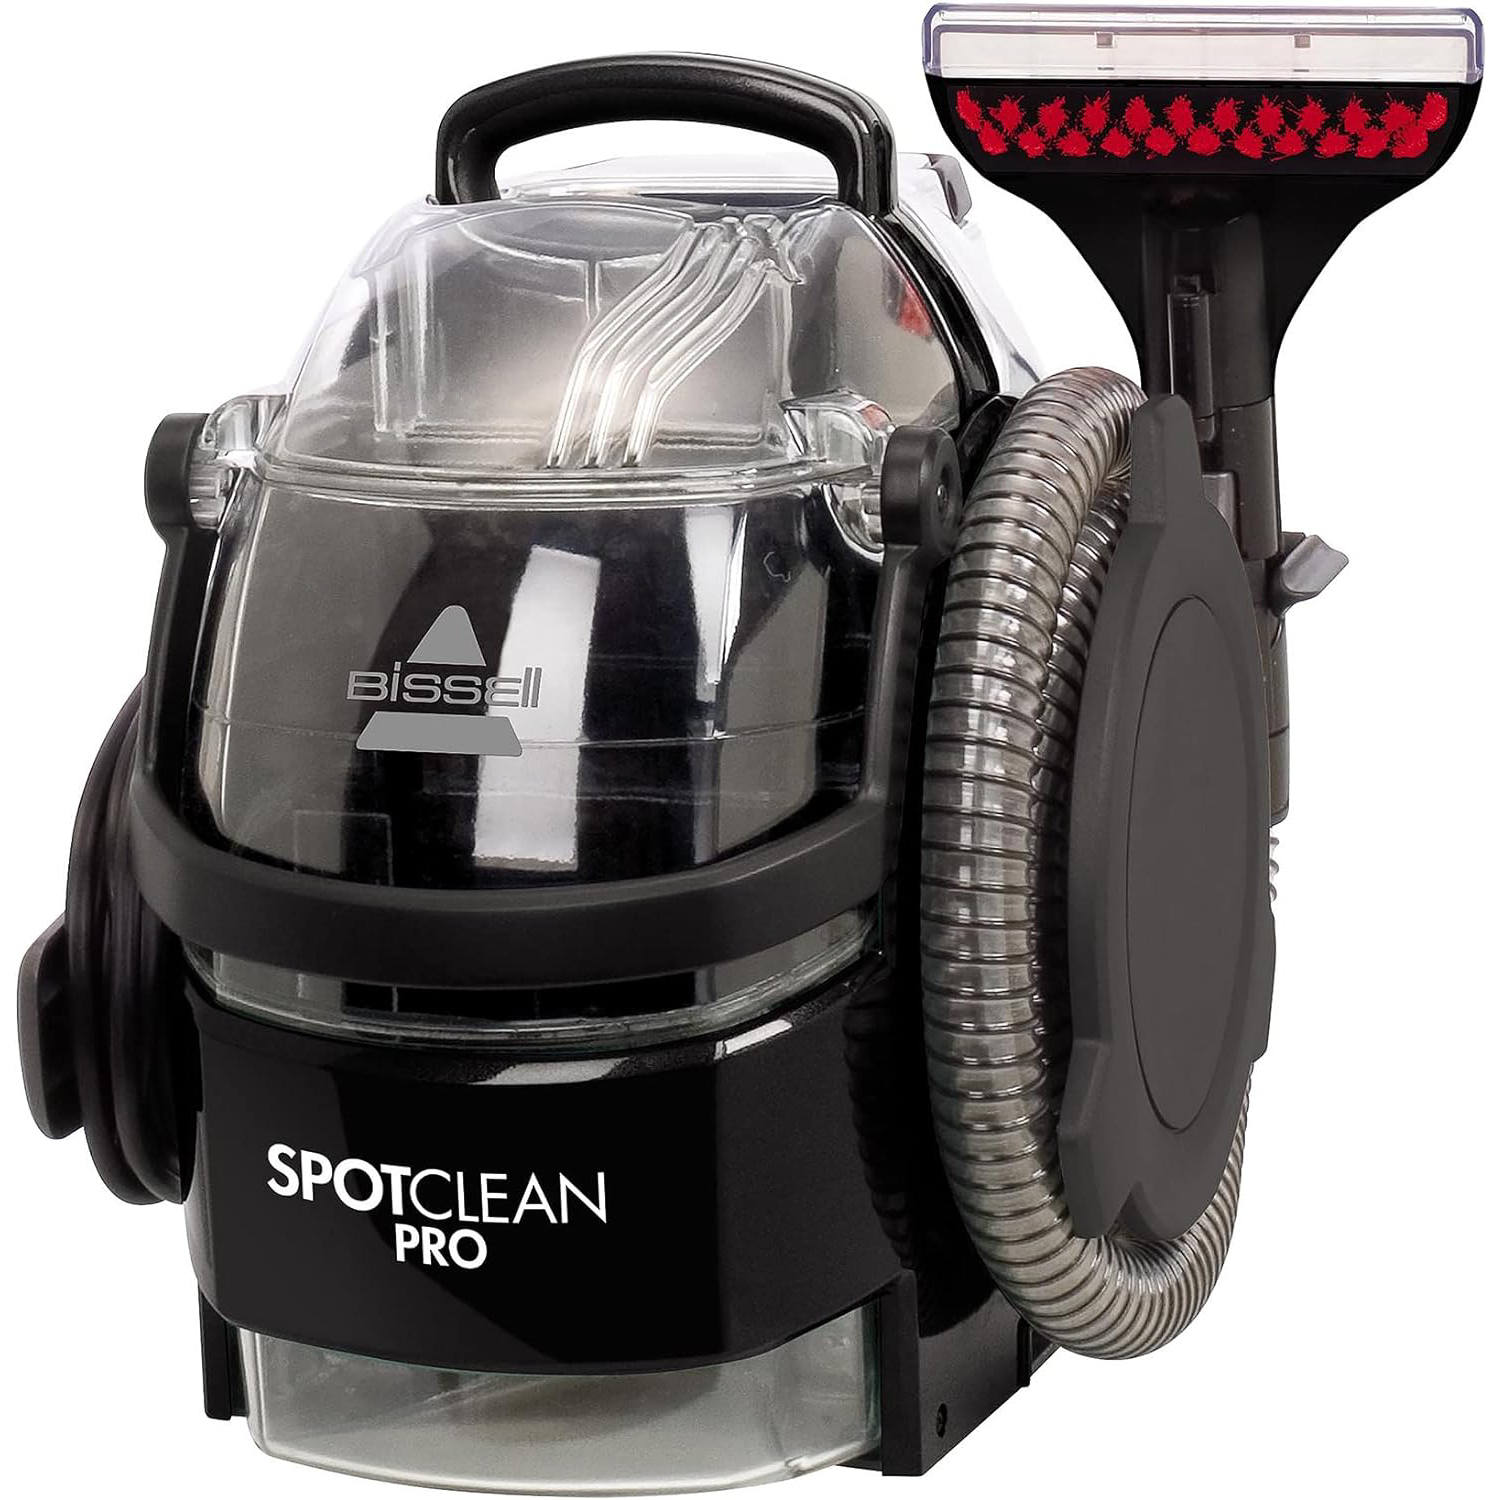 BISSELL SpotClean Pro _ 750W Portable Carpet Cleaner New